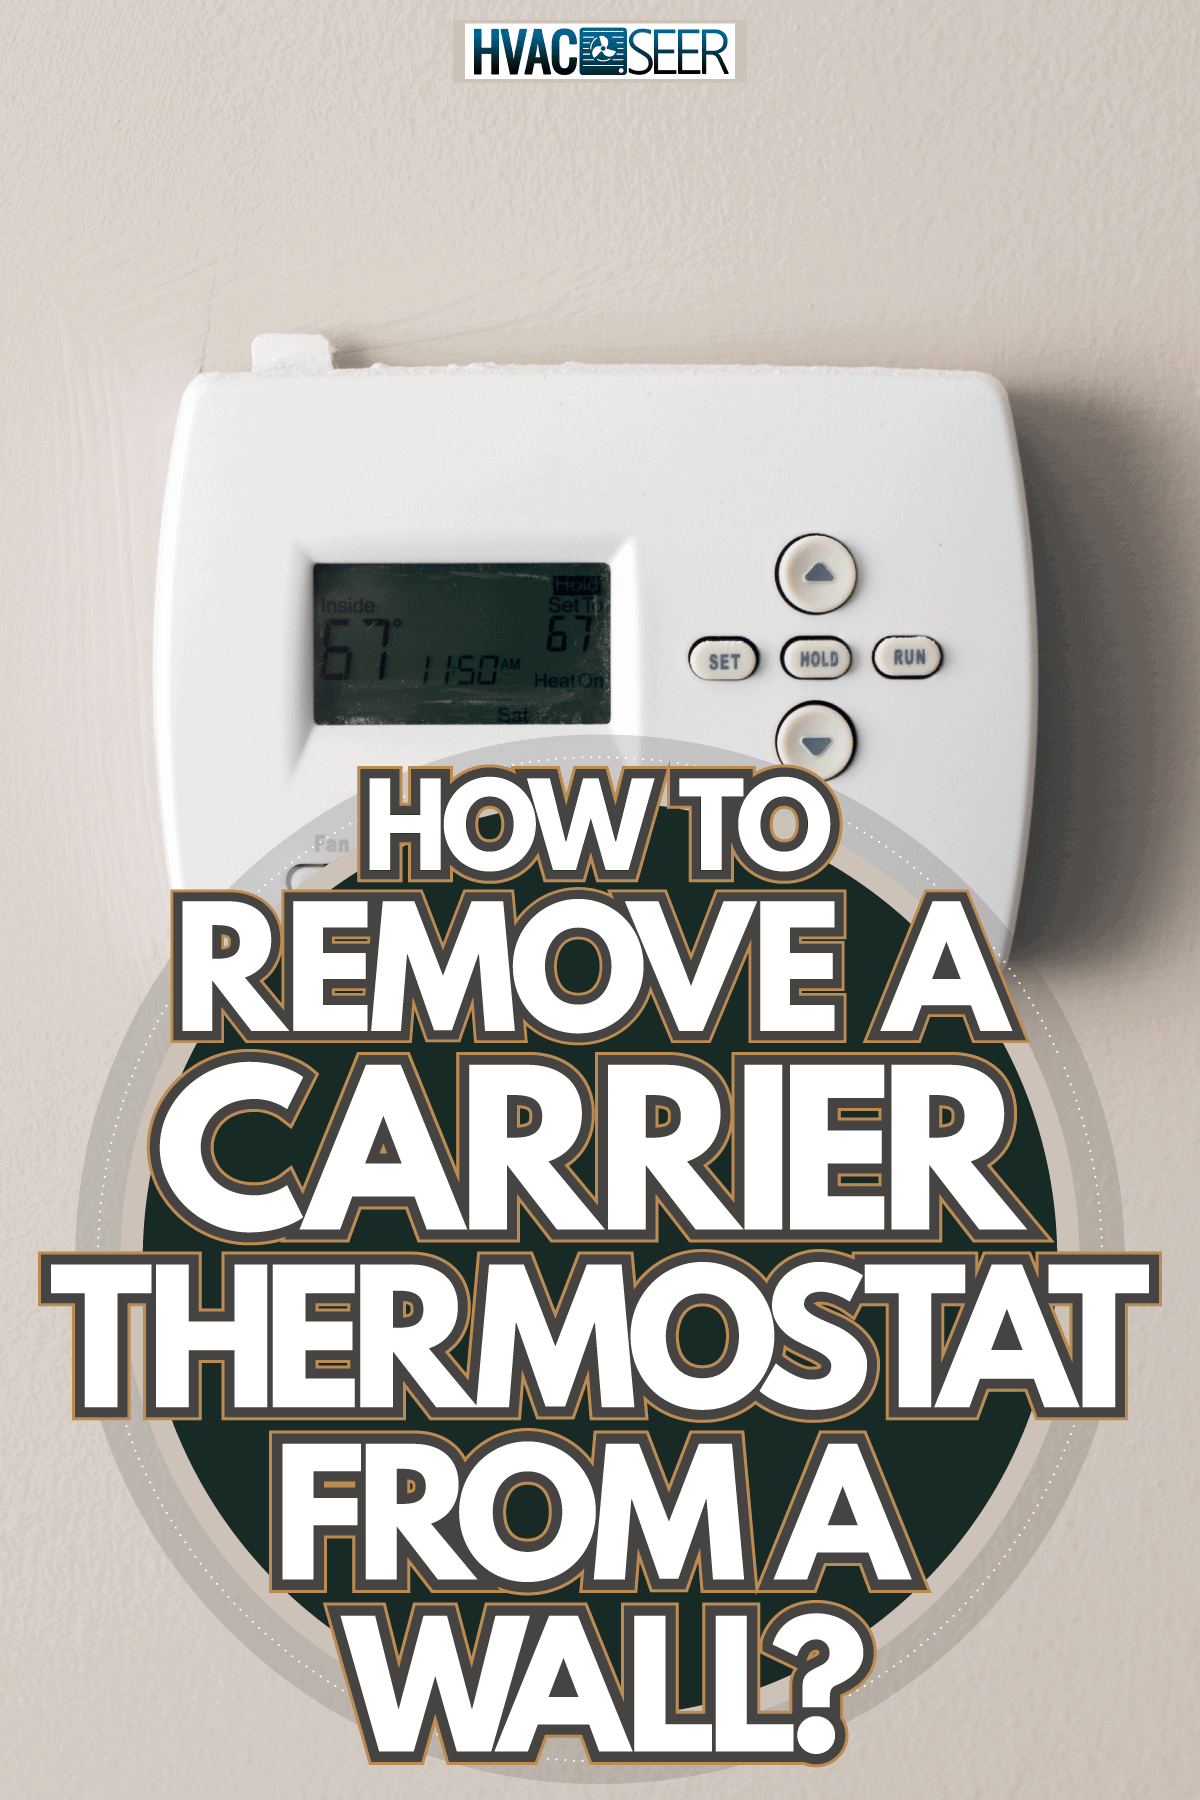 A Carrier thermostat mounted on a beige wall, How To Remove A Carrier Thermostat From A Wall?